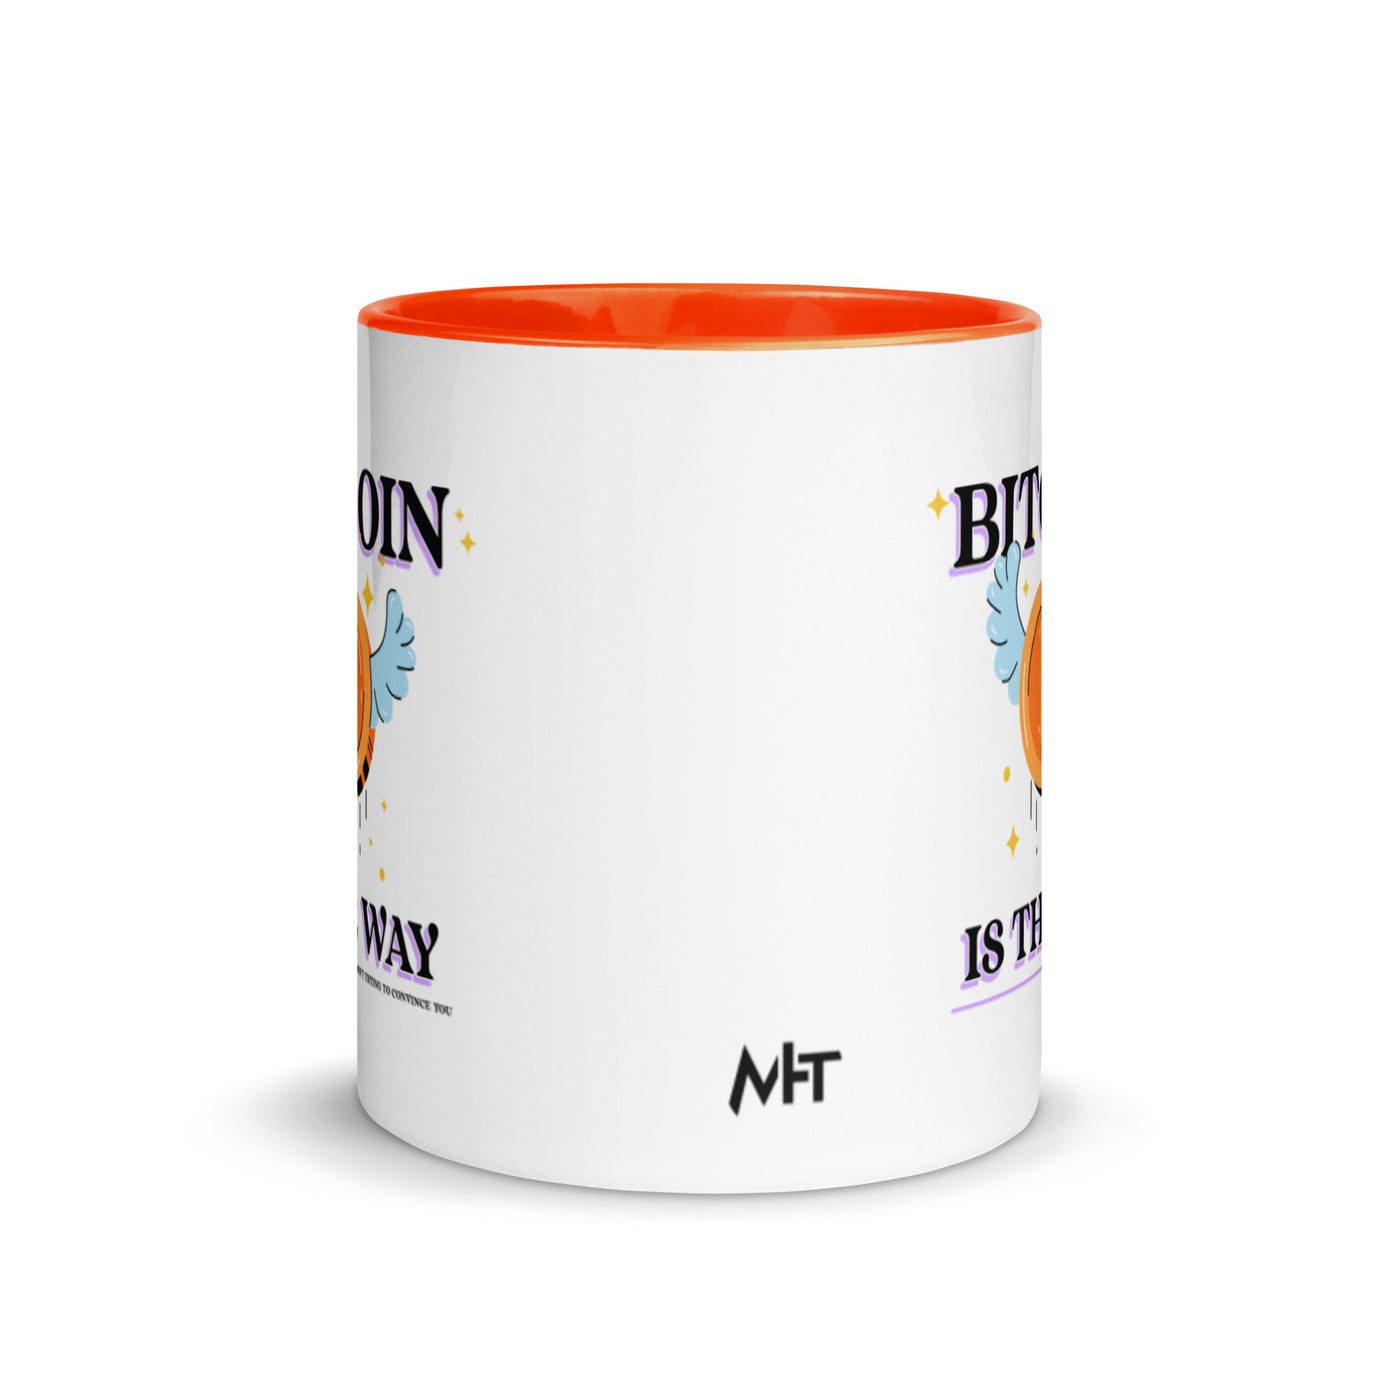 Bitcoin is the way - Mug with Color Inside